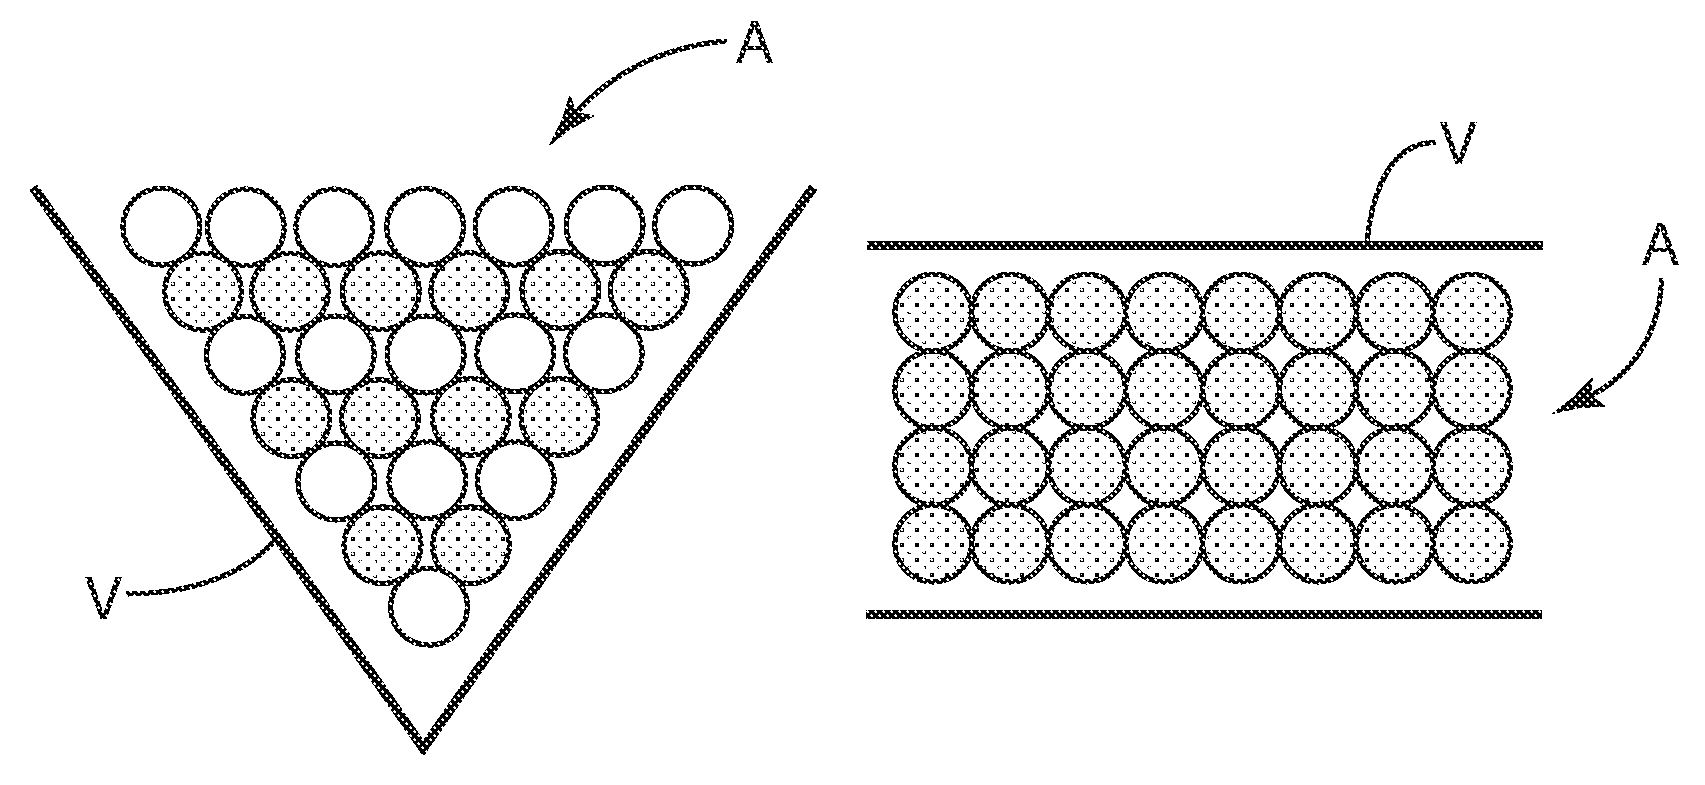 Formation of close-packed sphere arrays in V-shaped grooves